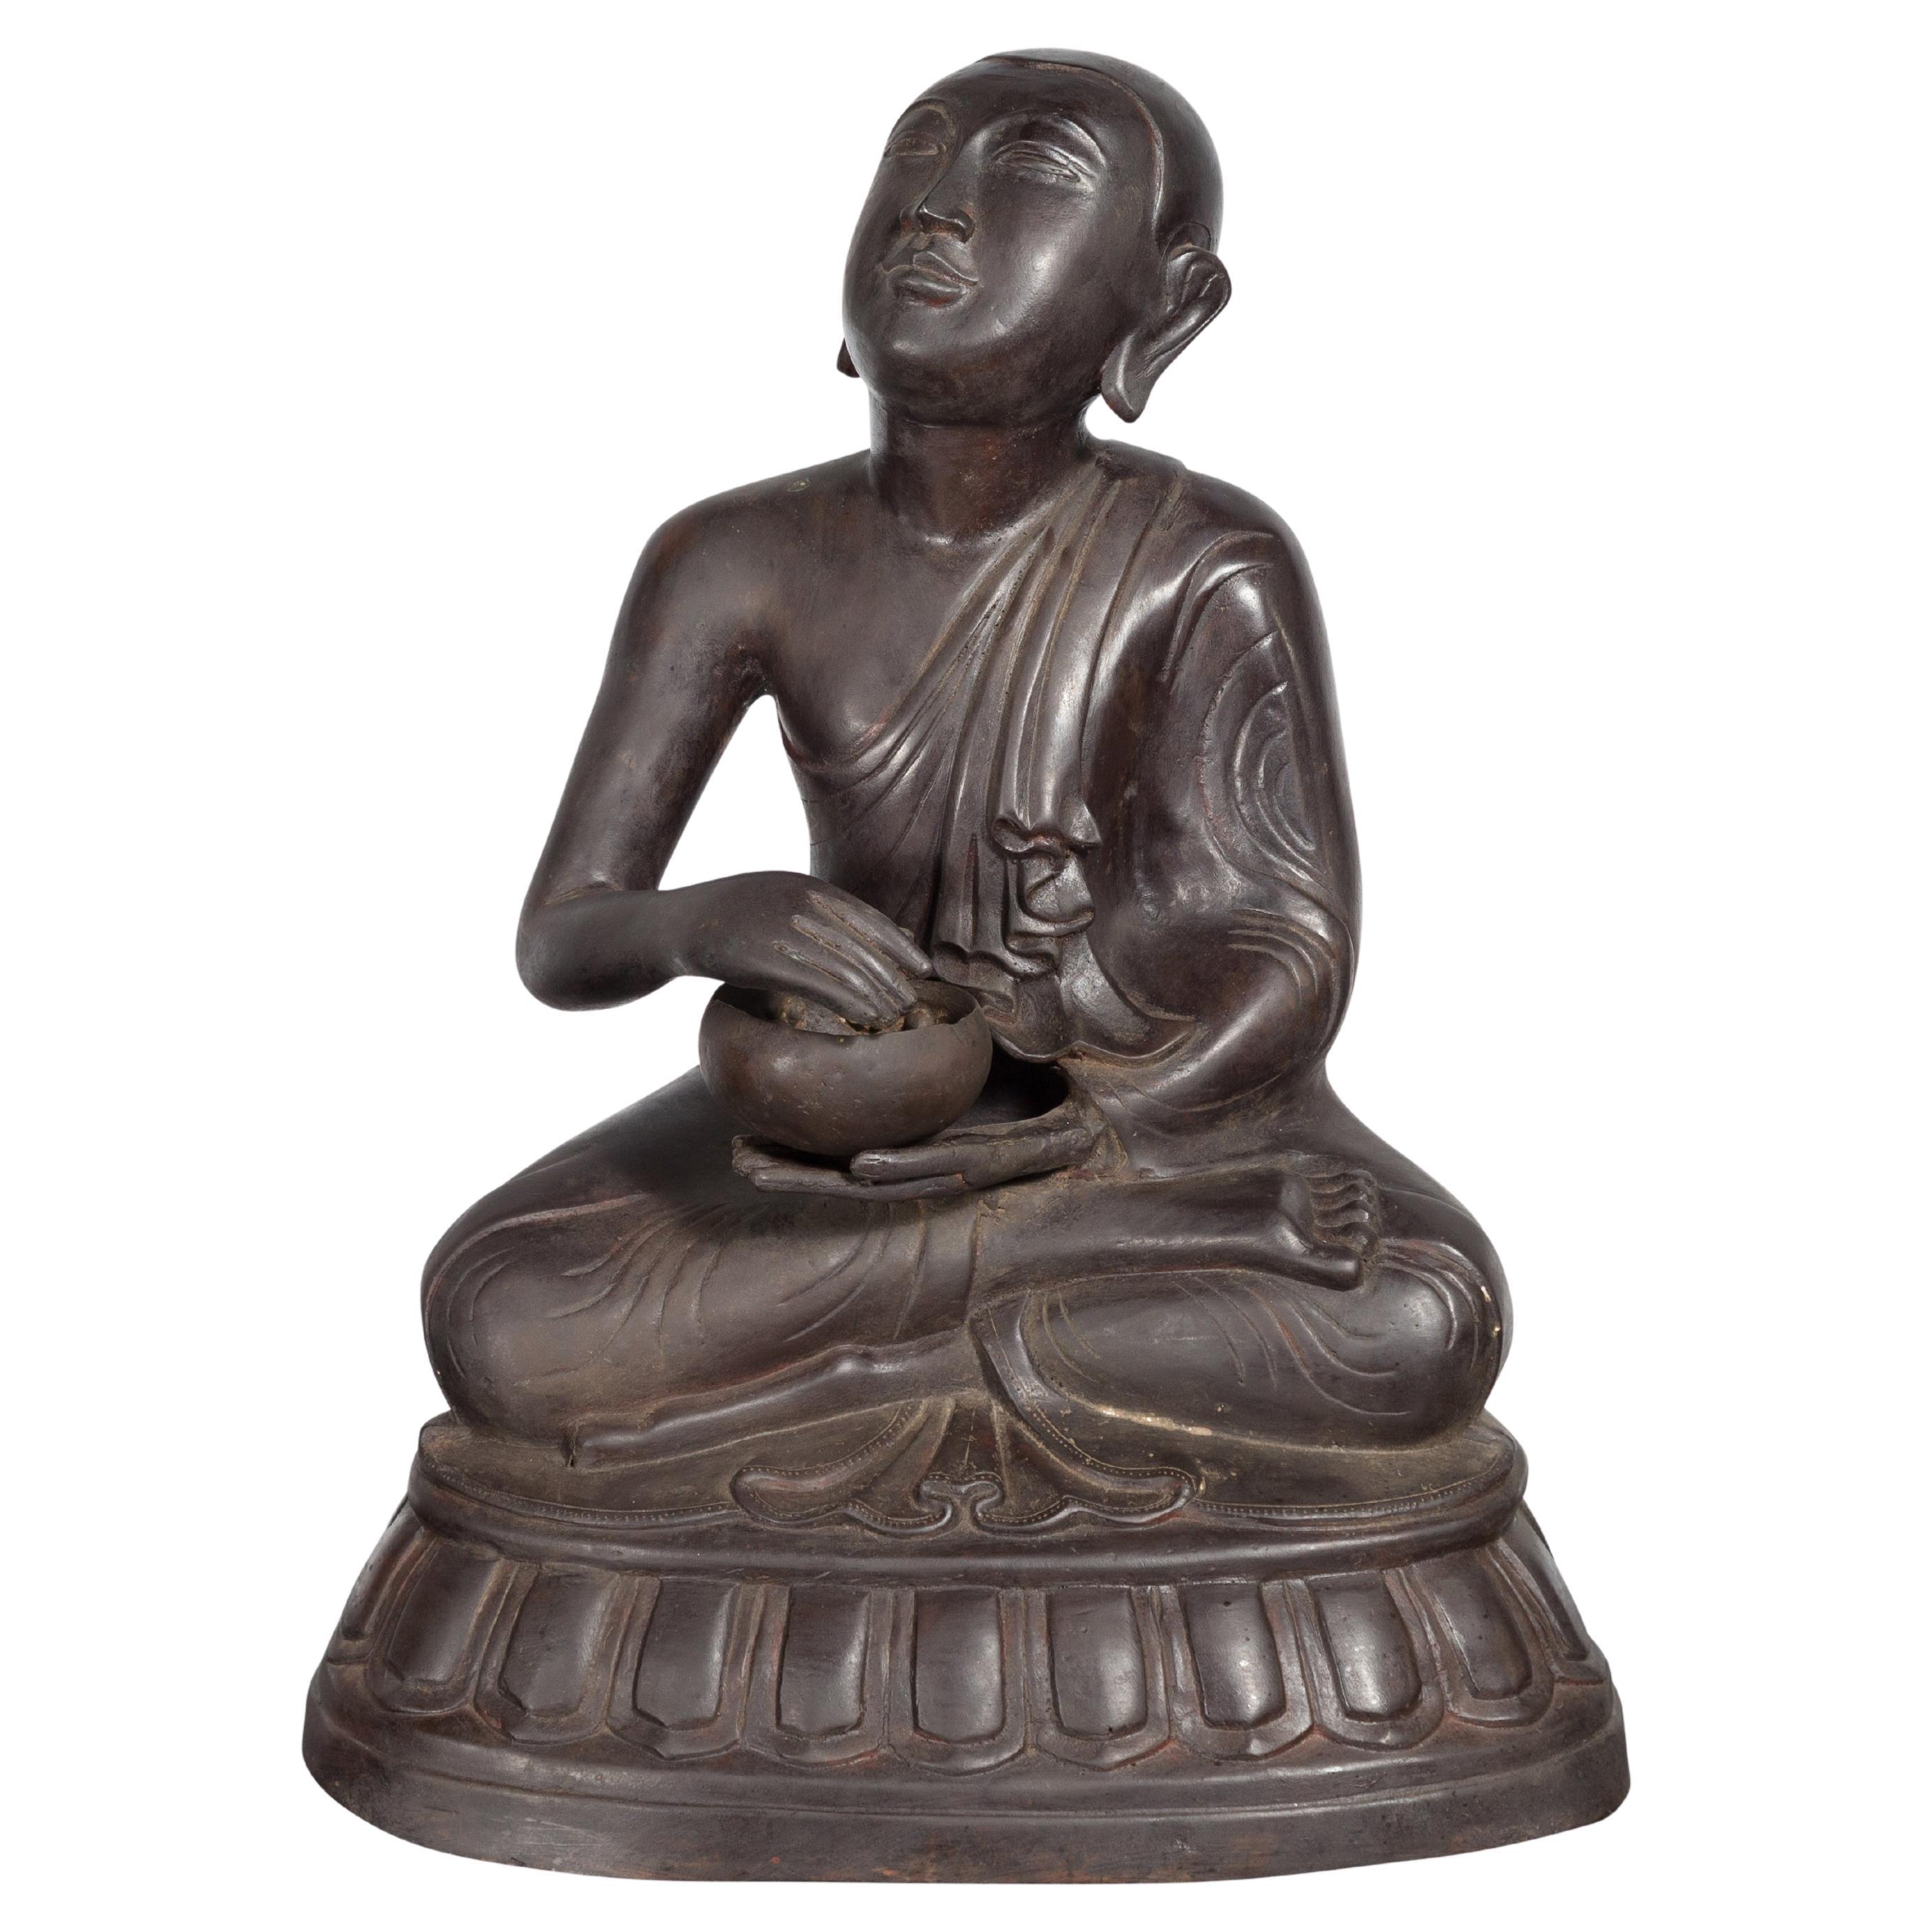 Bronze Lost Wax Sculpture Depicting a Praying Buddhist Monk with Offering Bowl